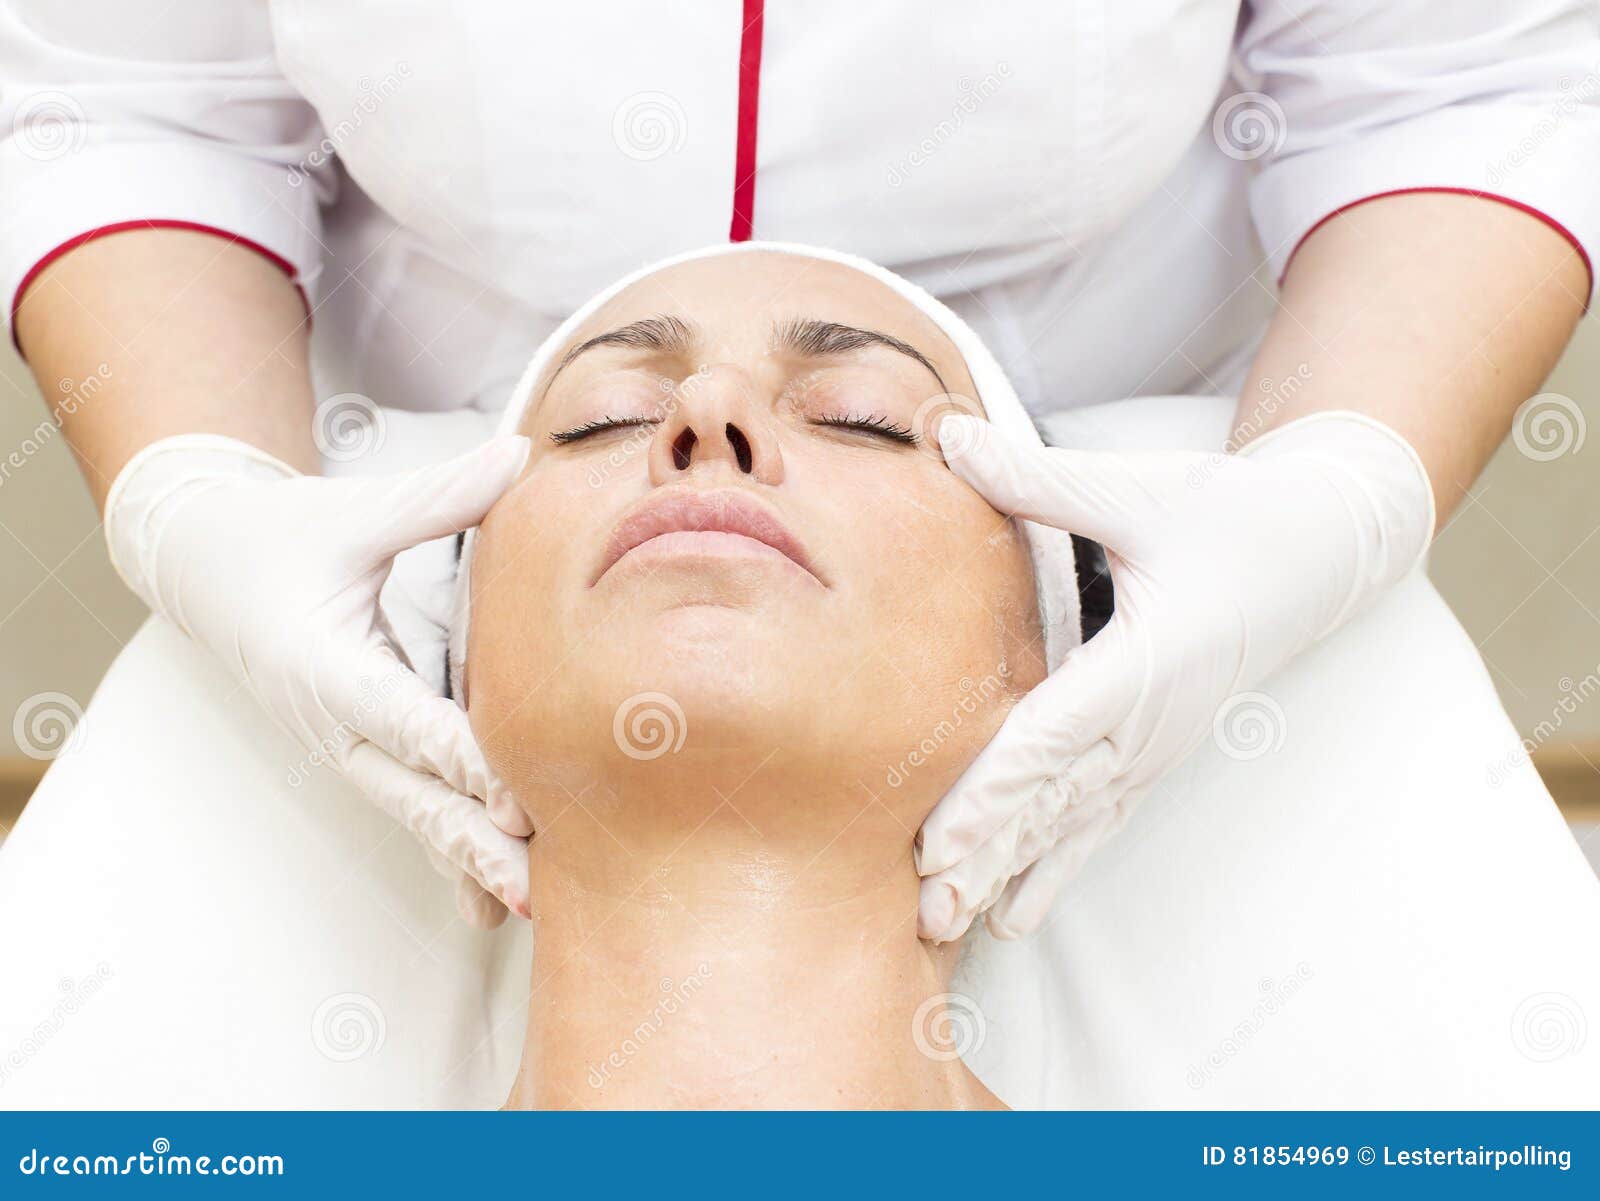 Process Of Massage And Facials Stock Image Image Of Massage Hands 81854969